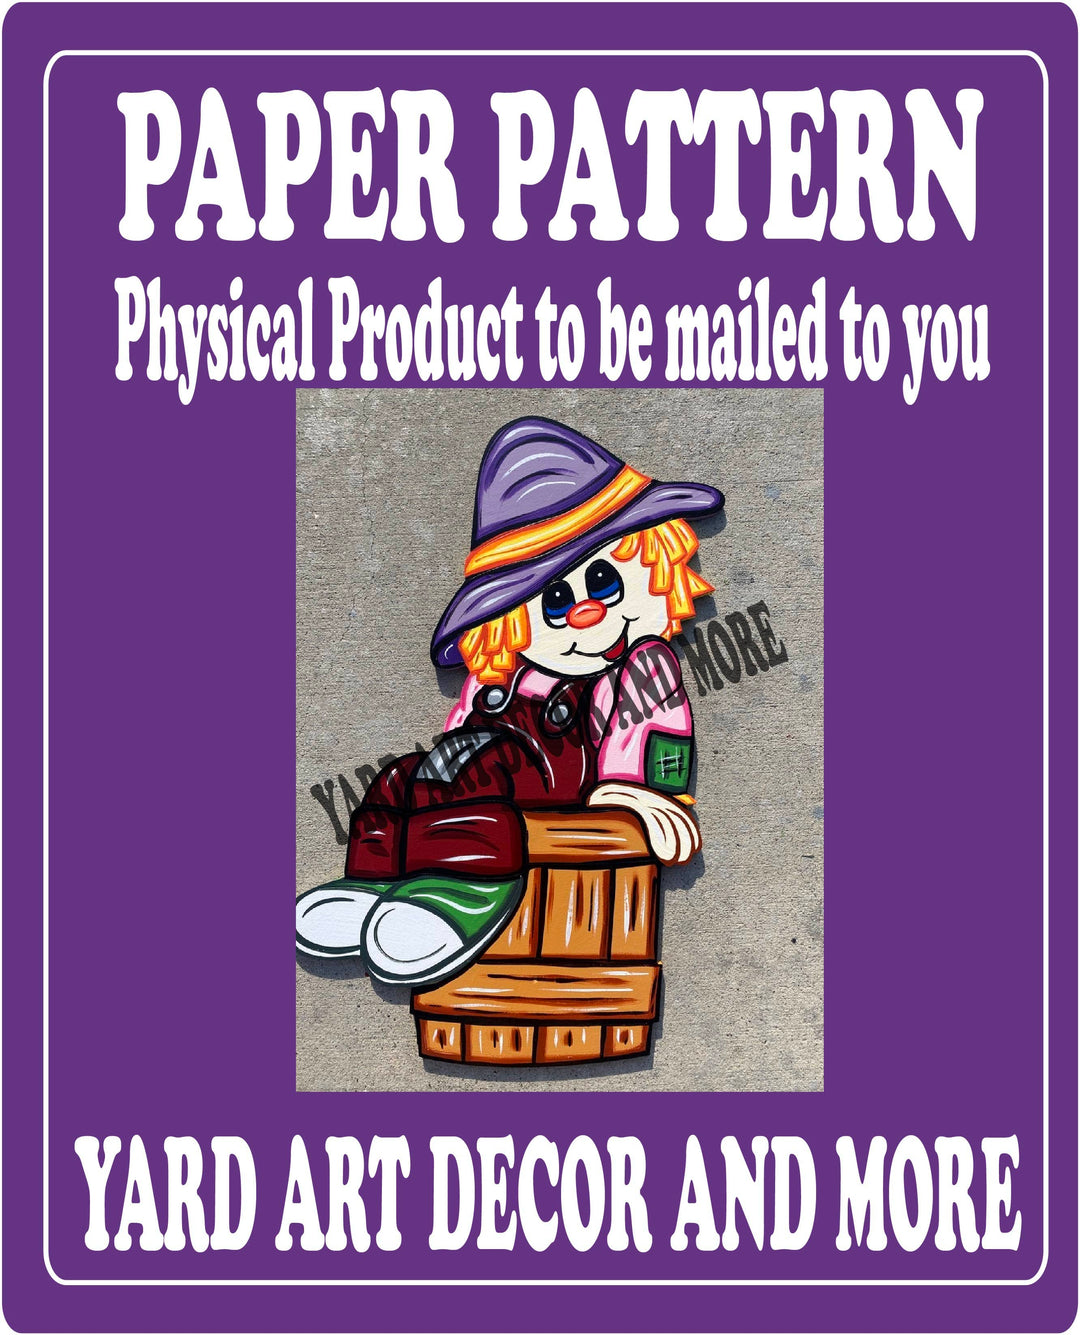 Fall Scarecrow sits in Bucket yard Art Decor paper pattern